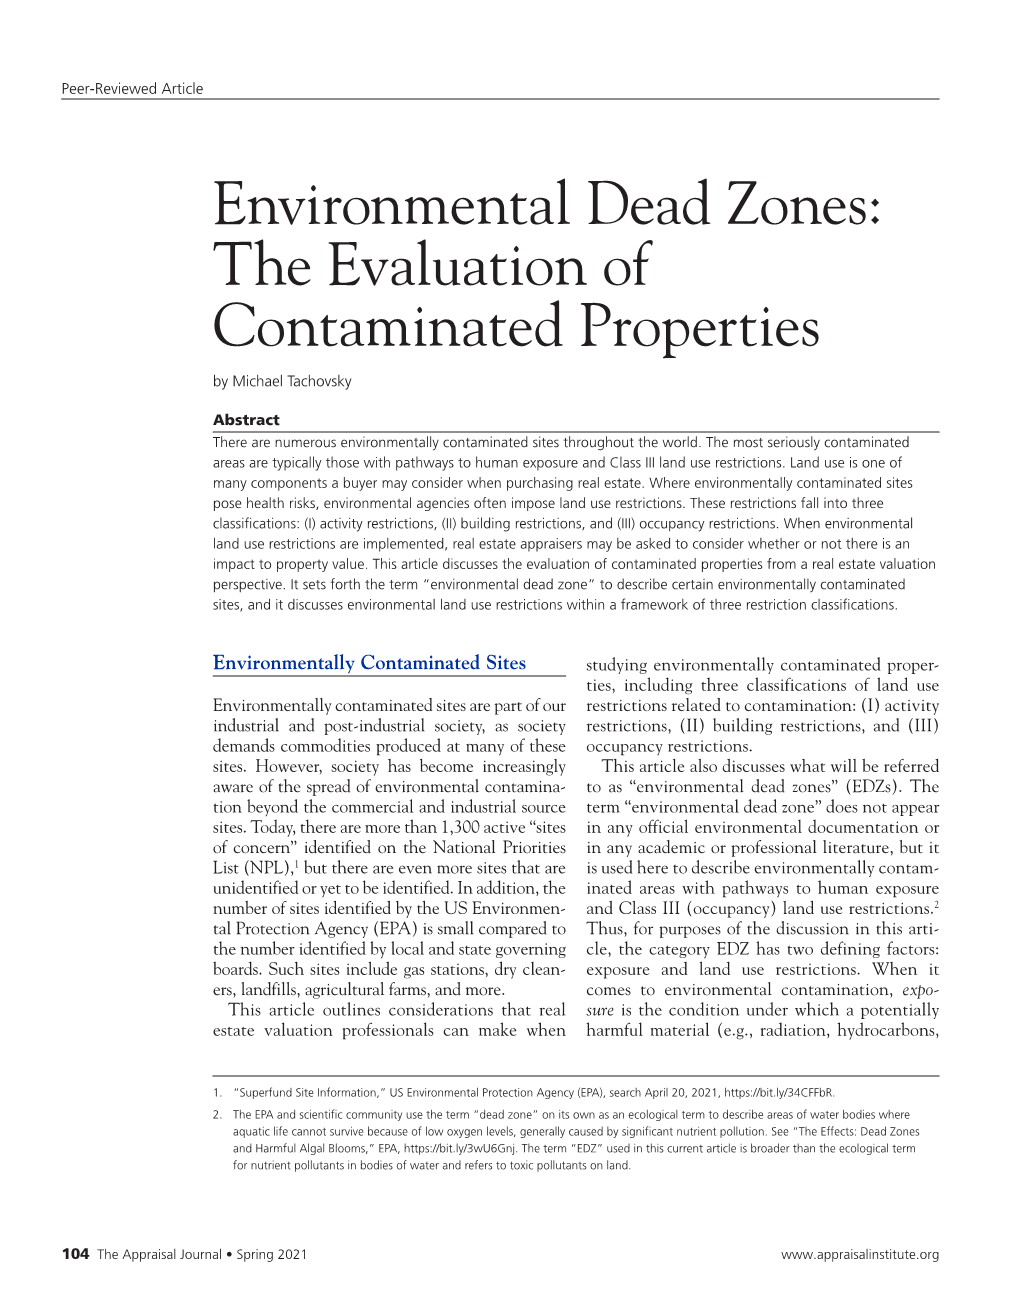 Environmental Dead Zones: the Evaluation of Contaminated Properties